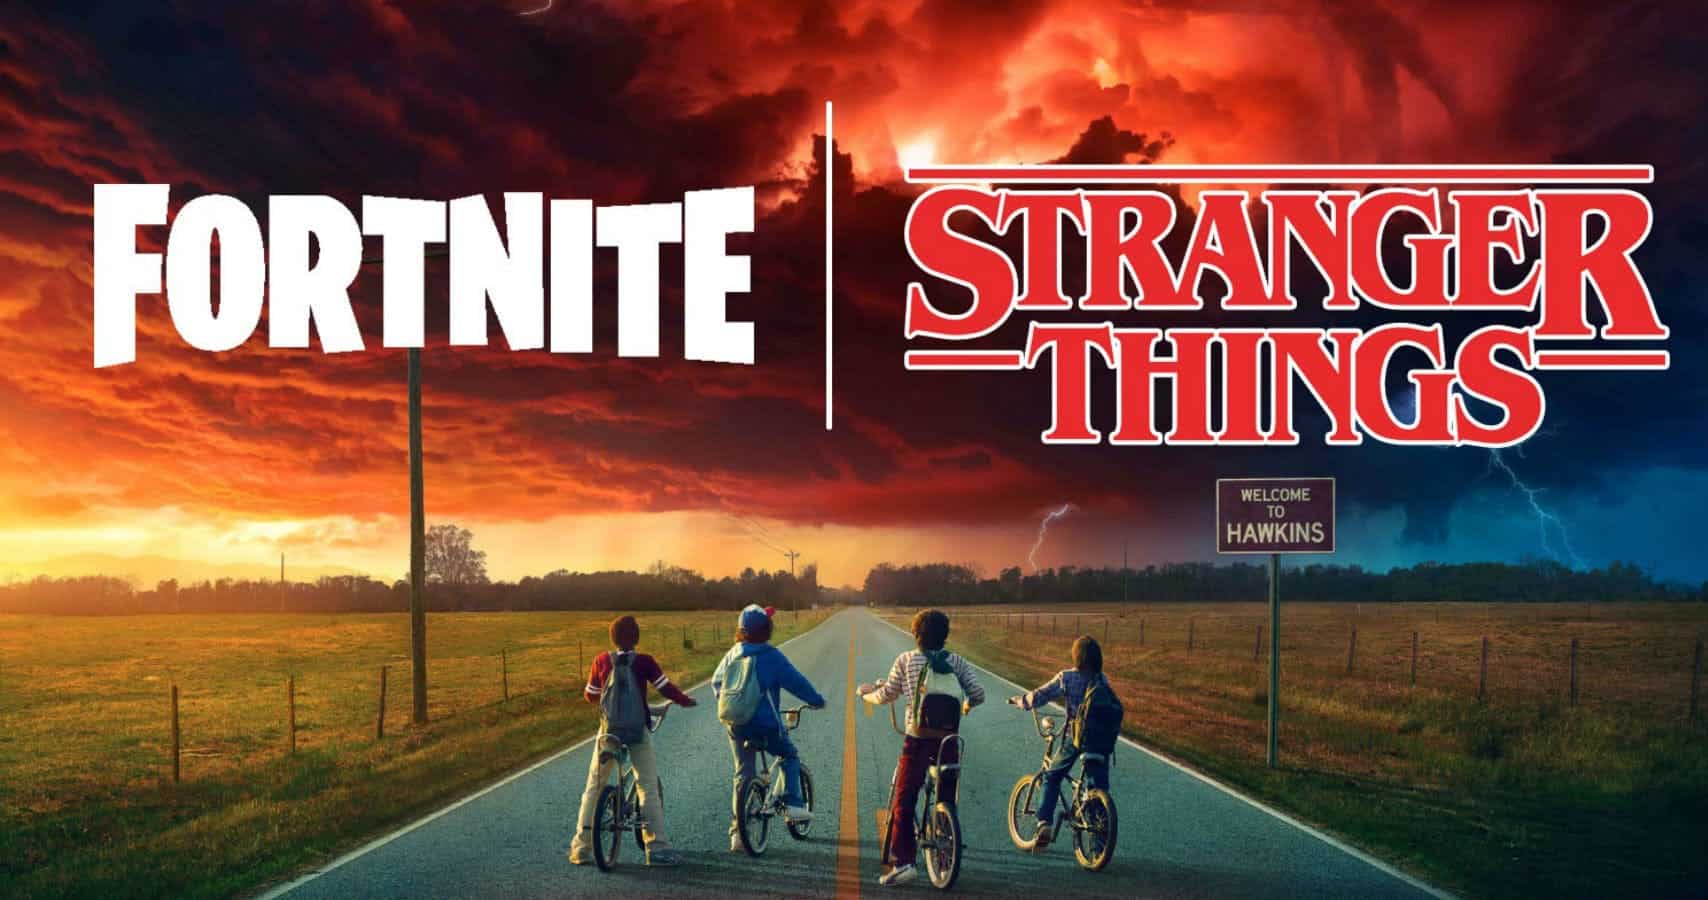 Fortnite Stranger Things Crossover Is Now Live - PlayStation Universe